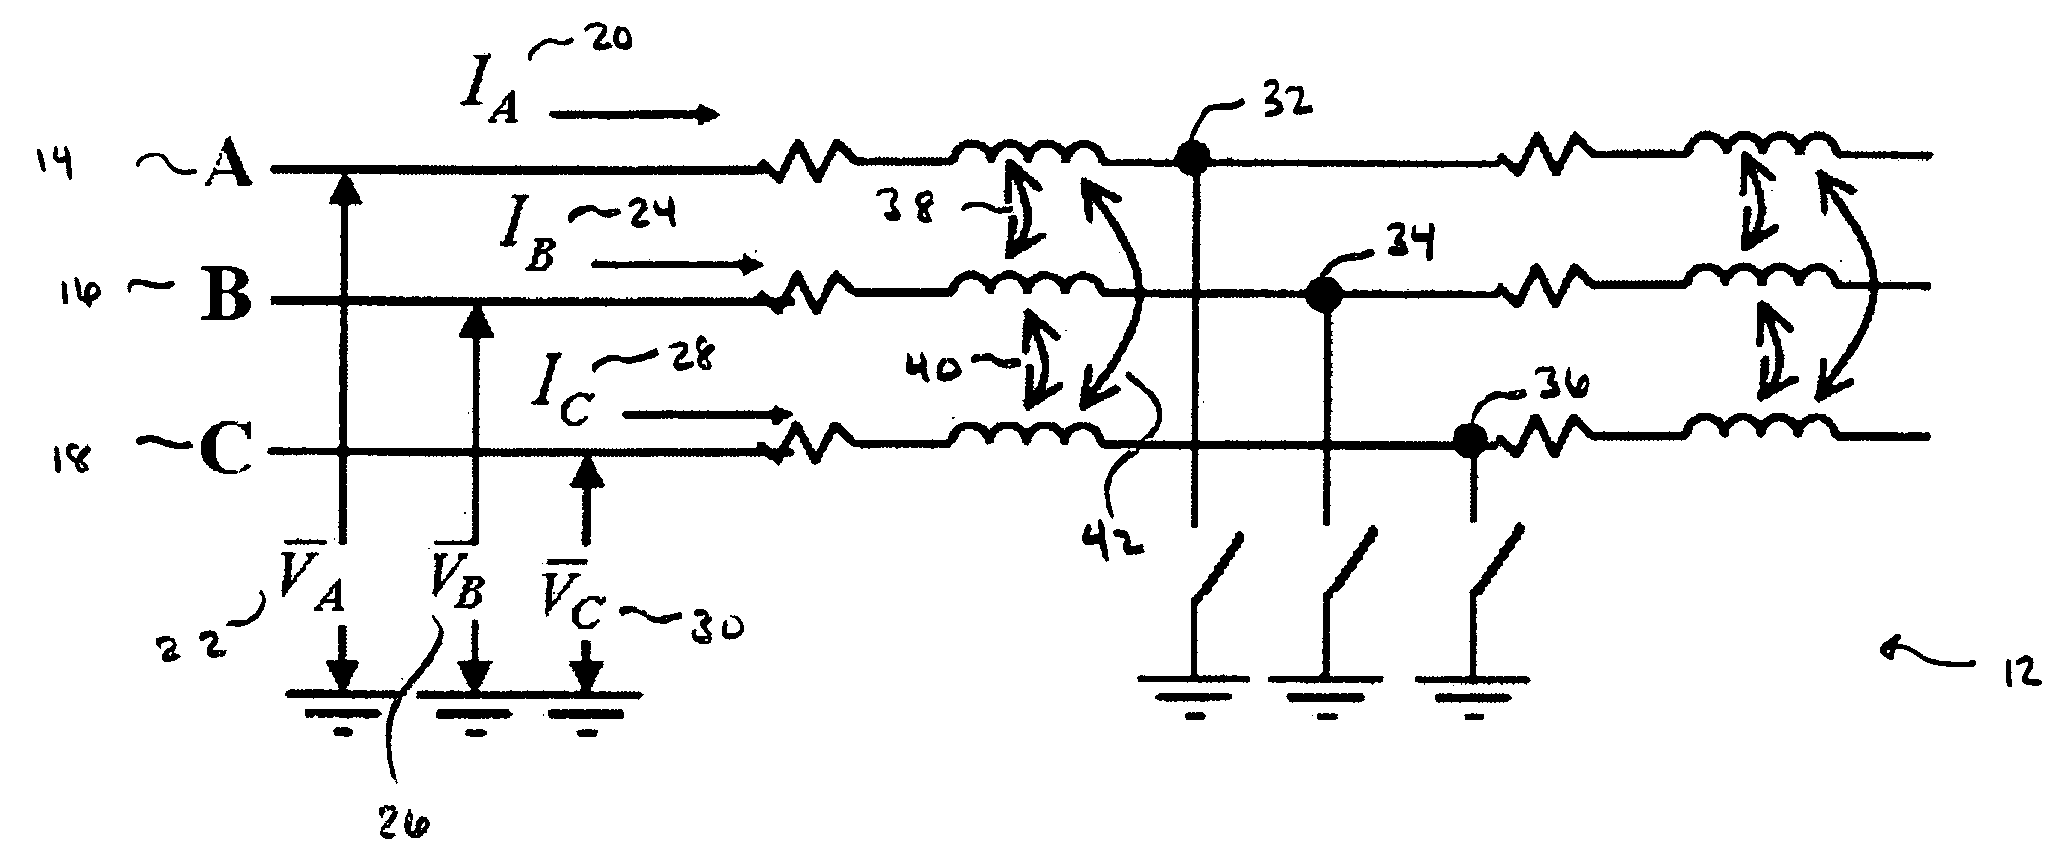 System for maintaining fault-type selection during an out-of-step condition